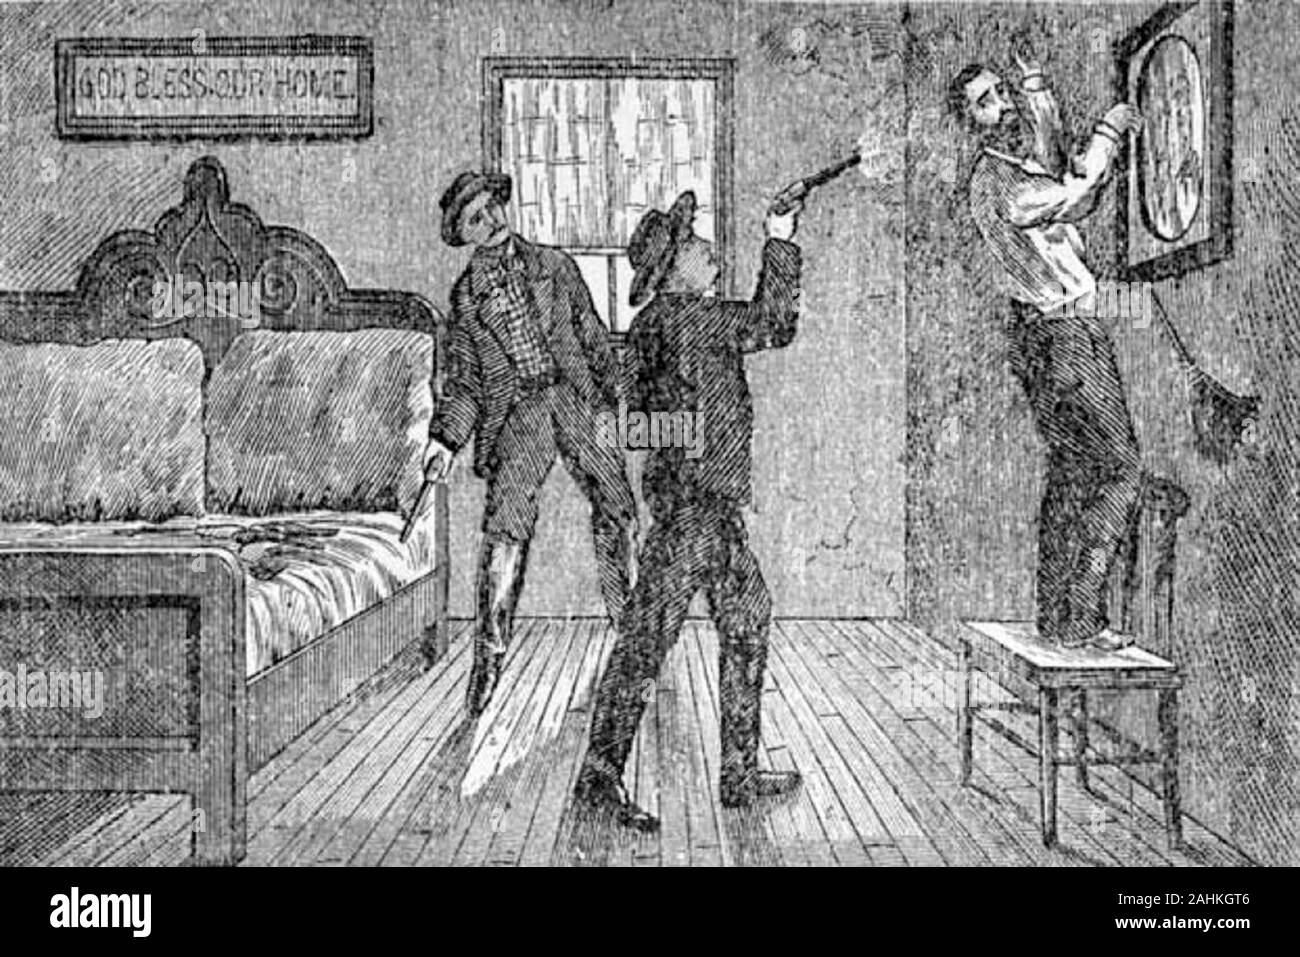 Illustration of Robert Ford famously shooting Jesse James in the back while he hangs a picture in his house. Ford's brother Charles looks on Stock Photo